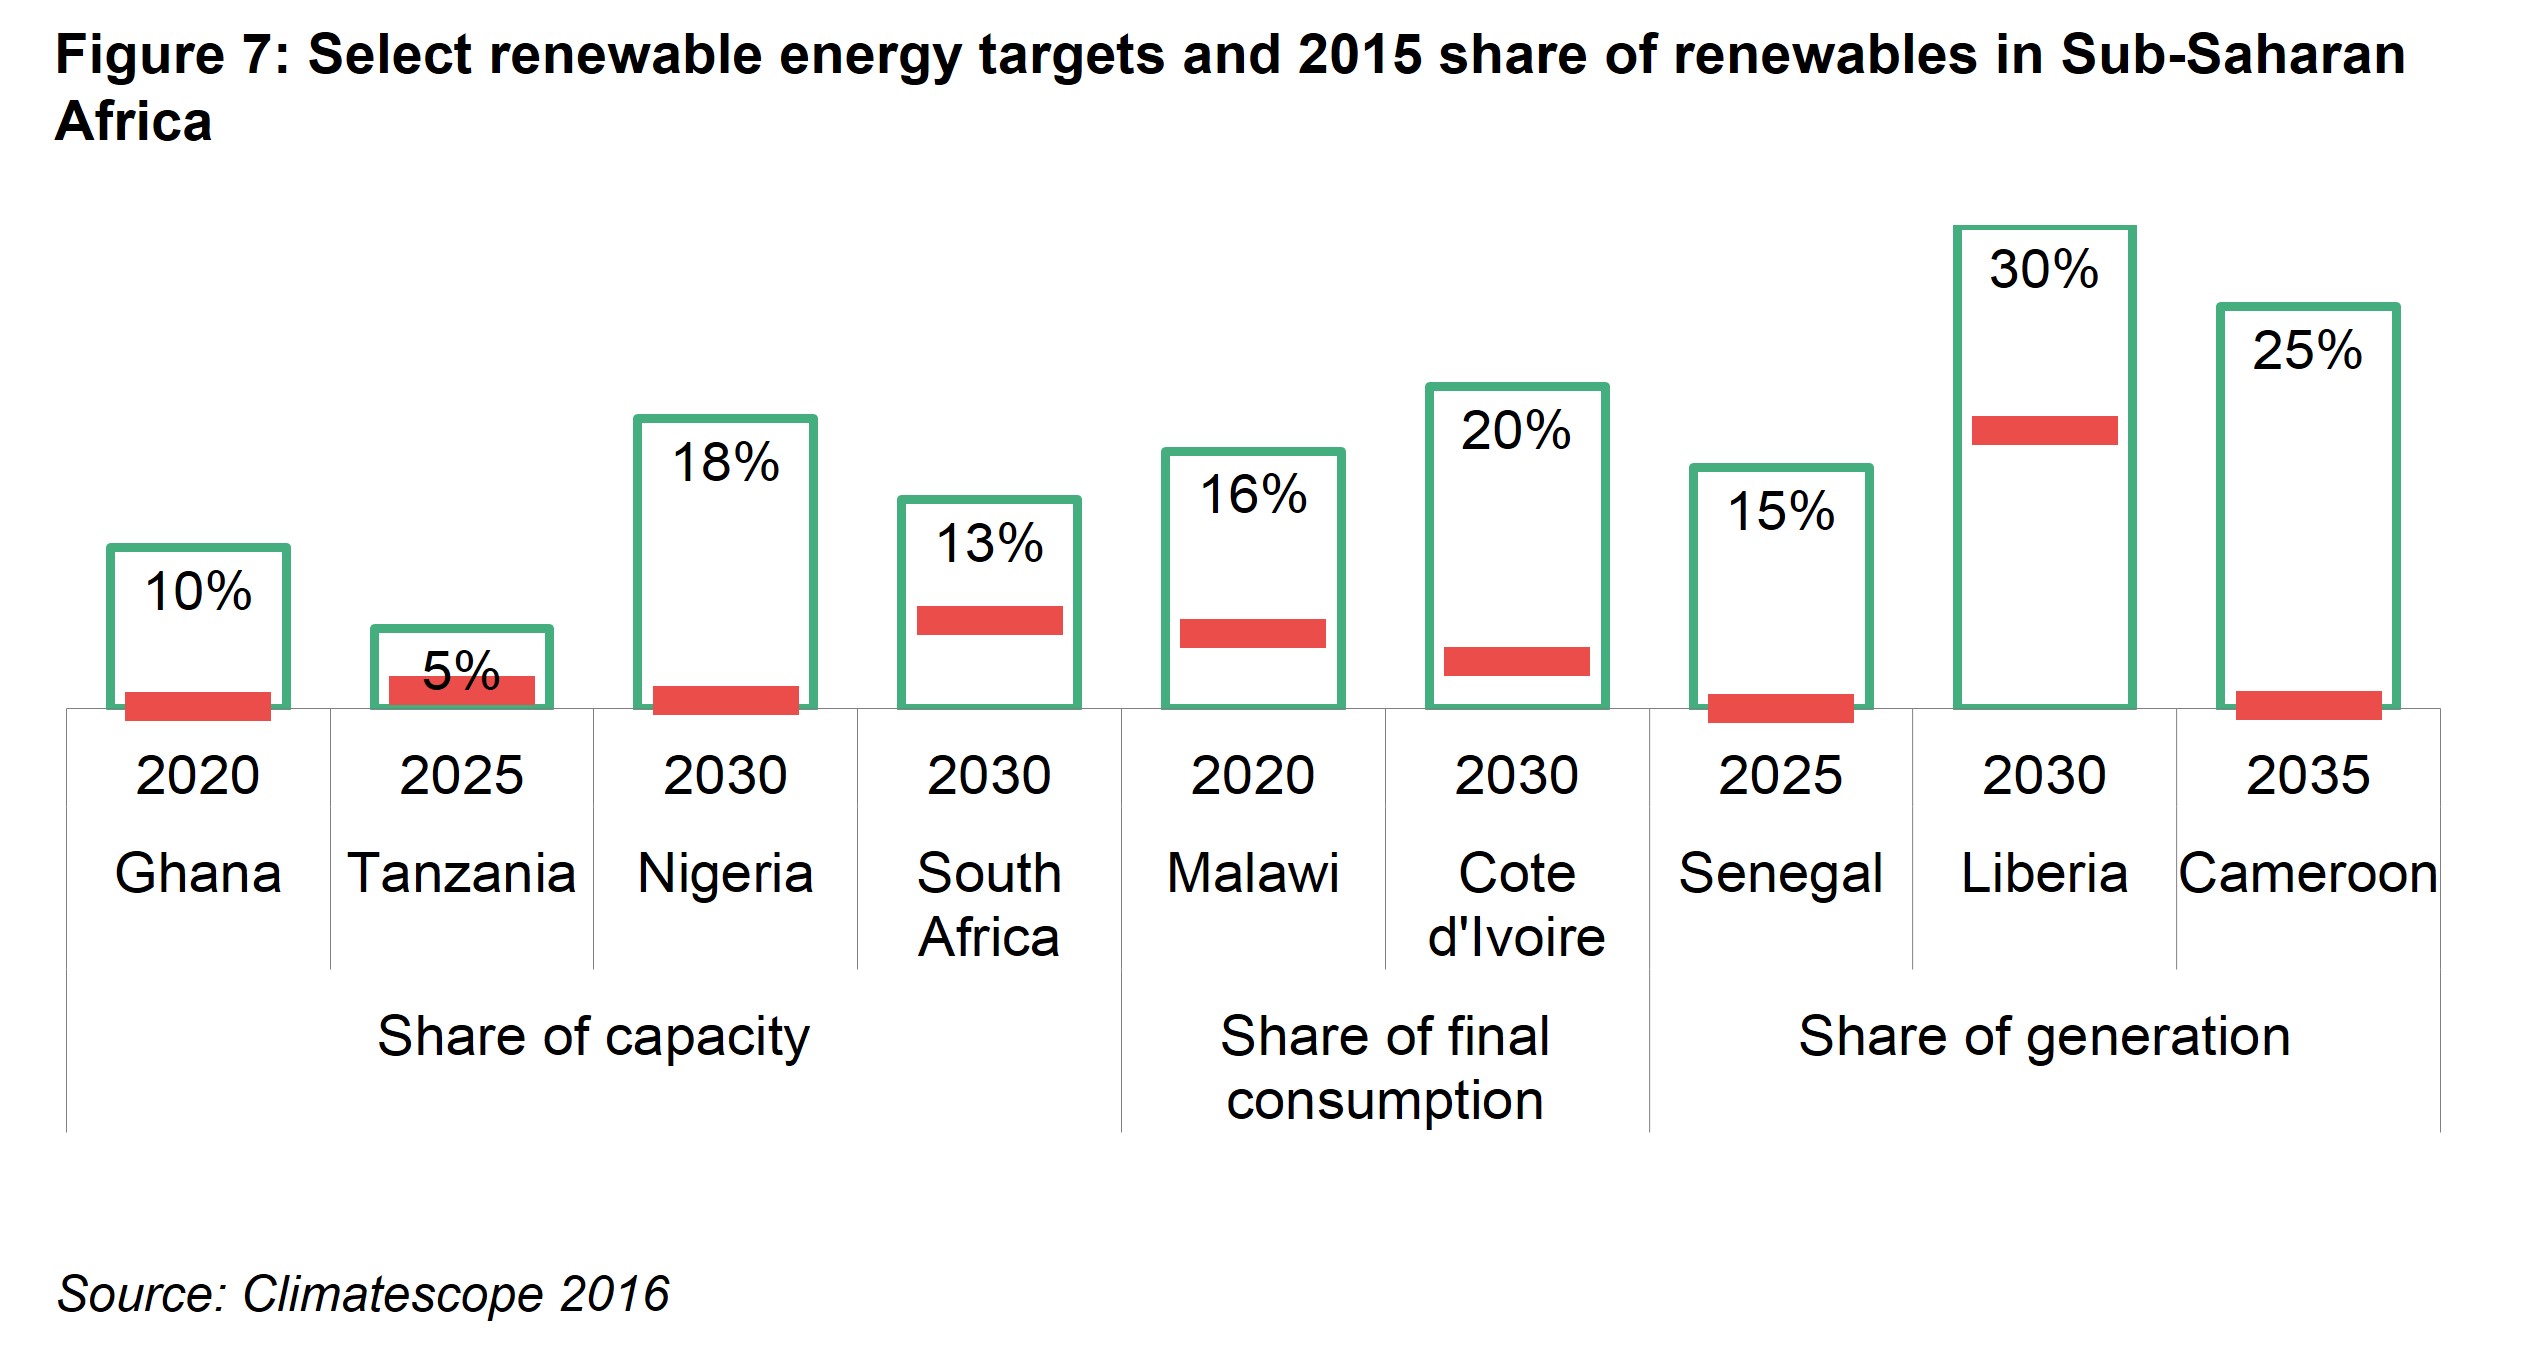 AM Fig 7 - Select renewable energy targets and 2015 share of renewables in Sub-Saharan Africa